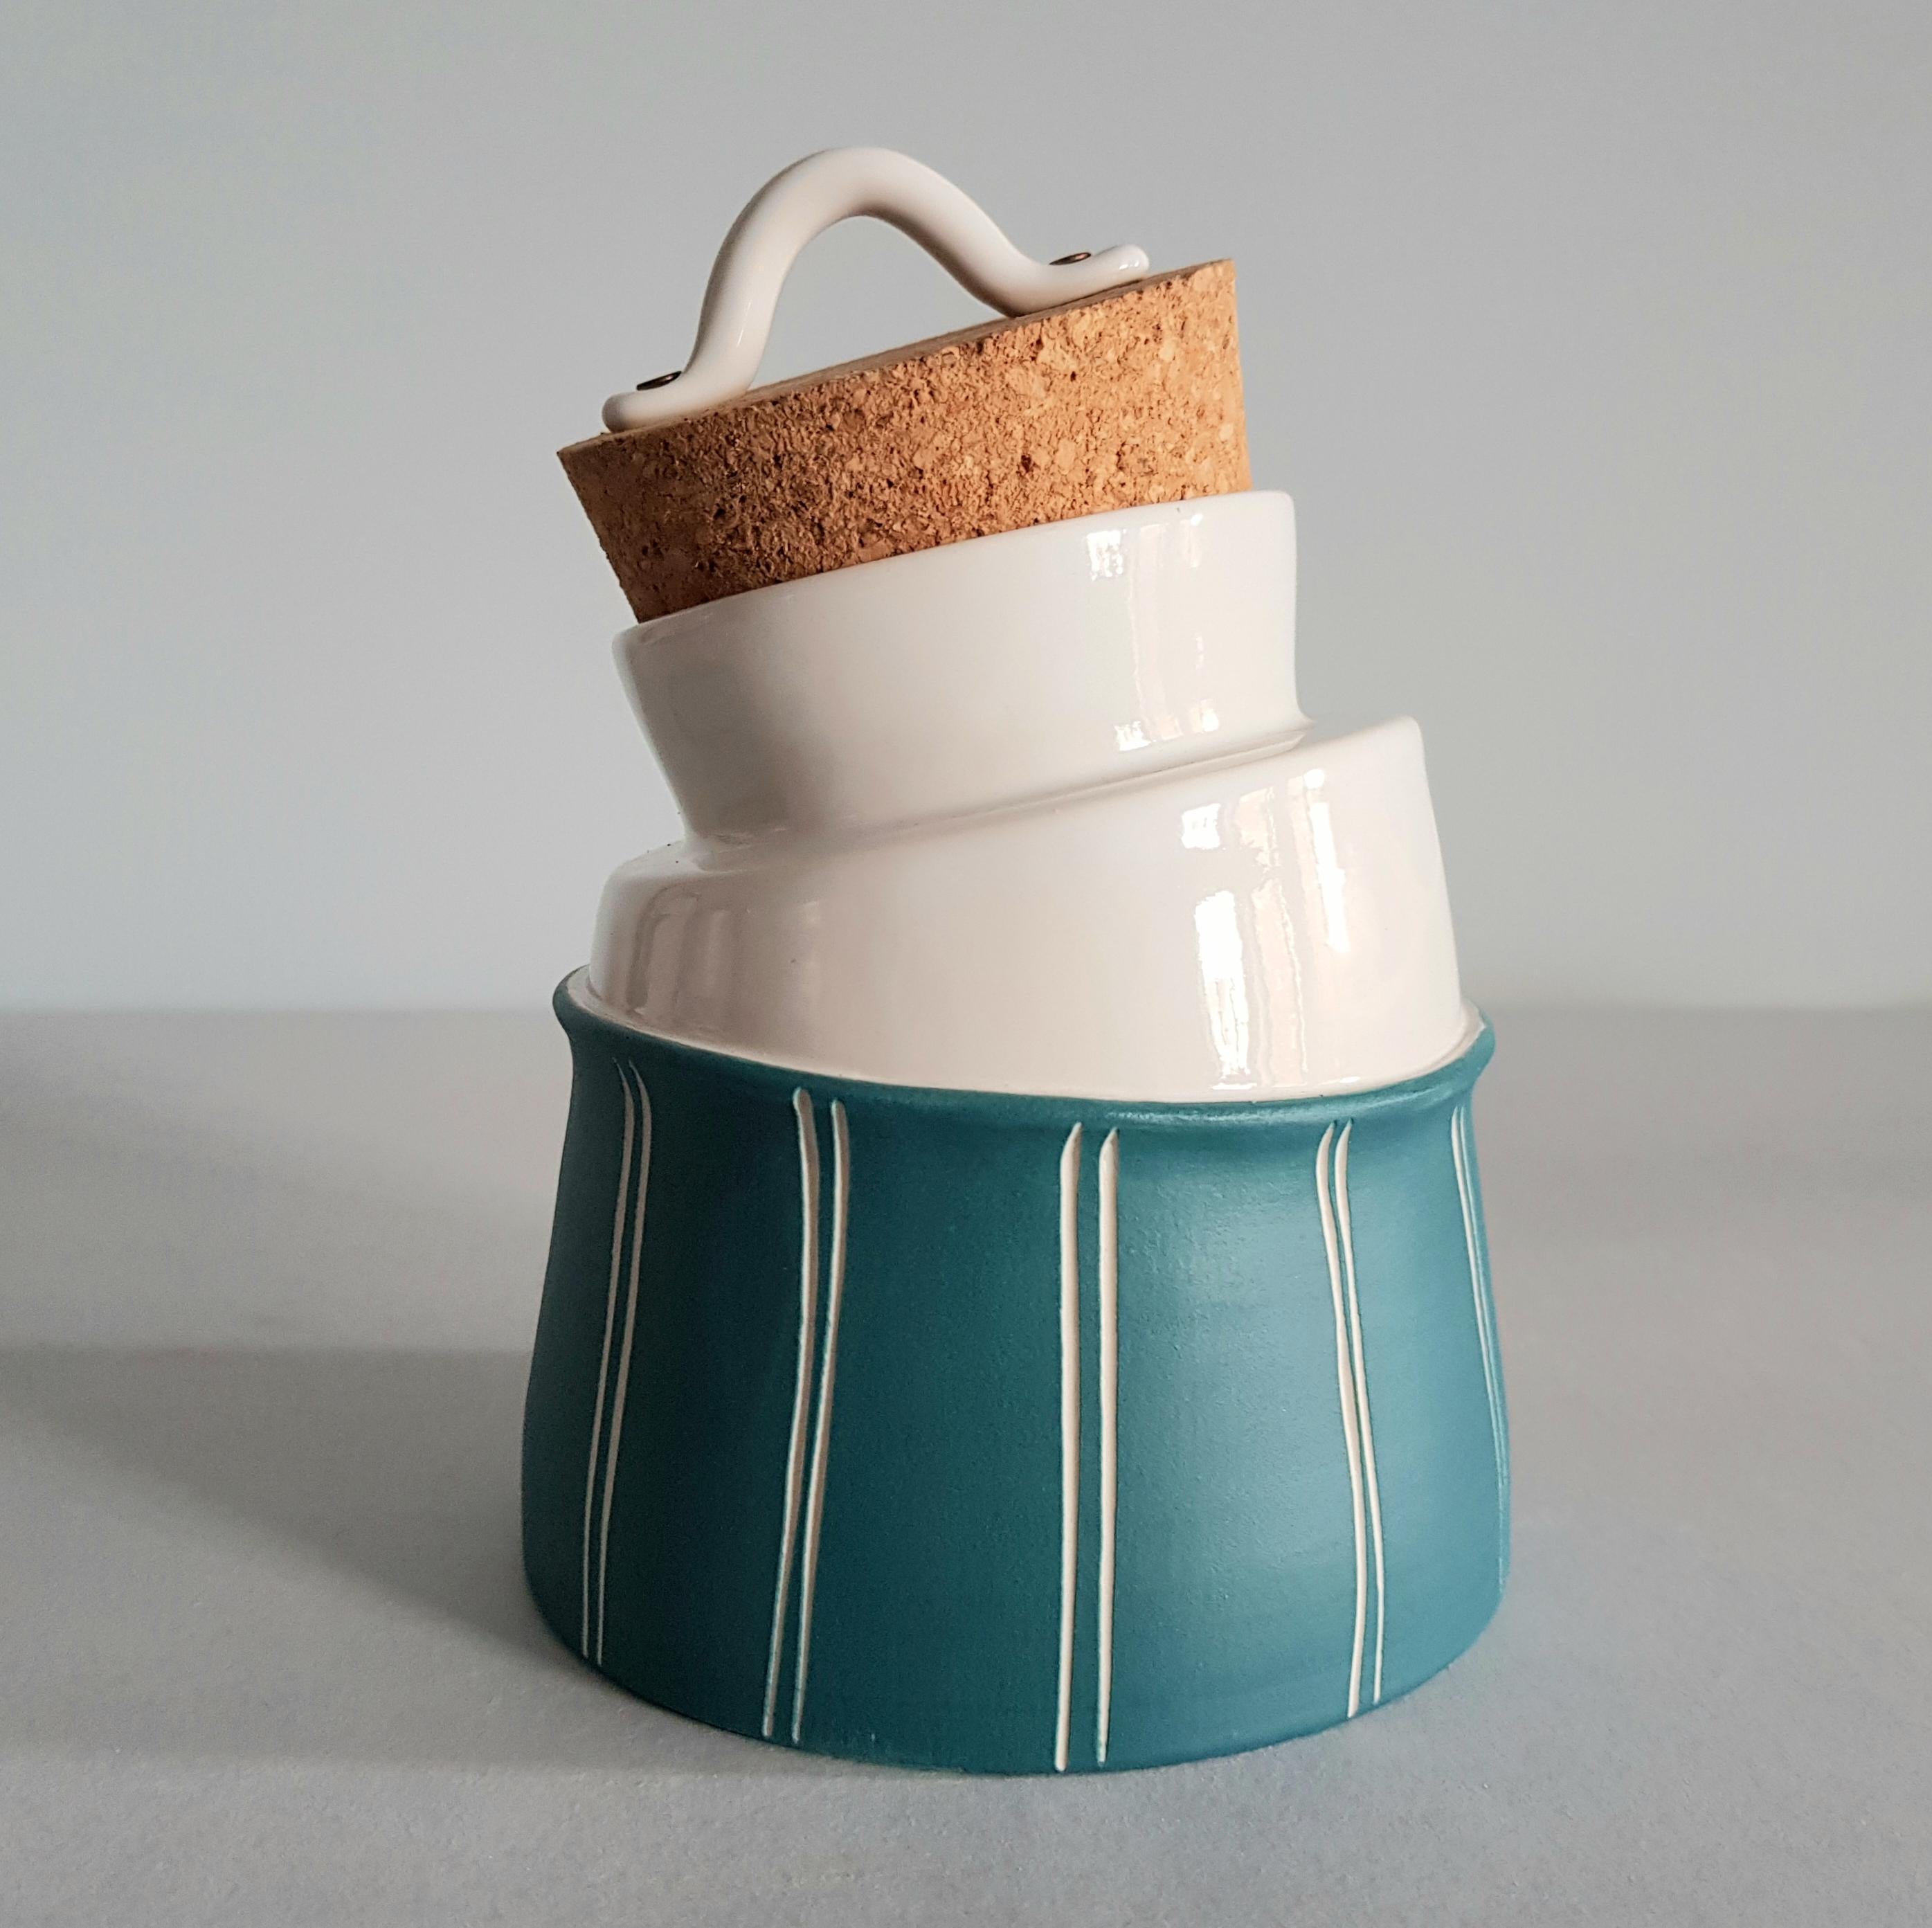 Contemporary Amélie Handcrafted Sugar Bowl, Handmade in Italy 2021, Choose Size and Colors For Sale